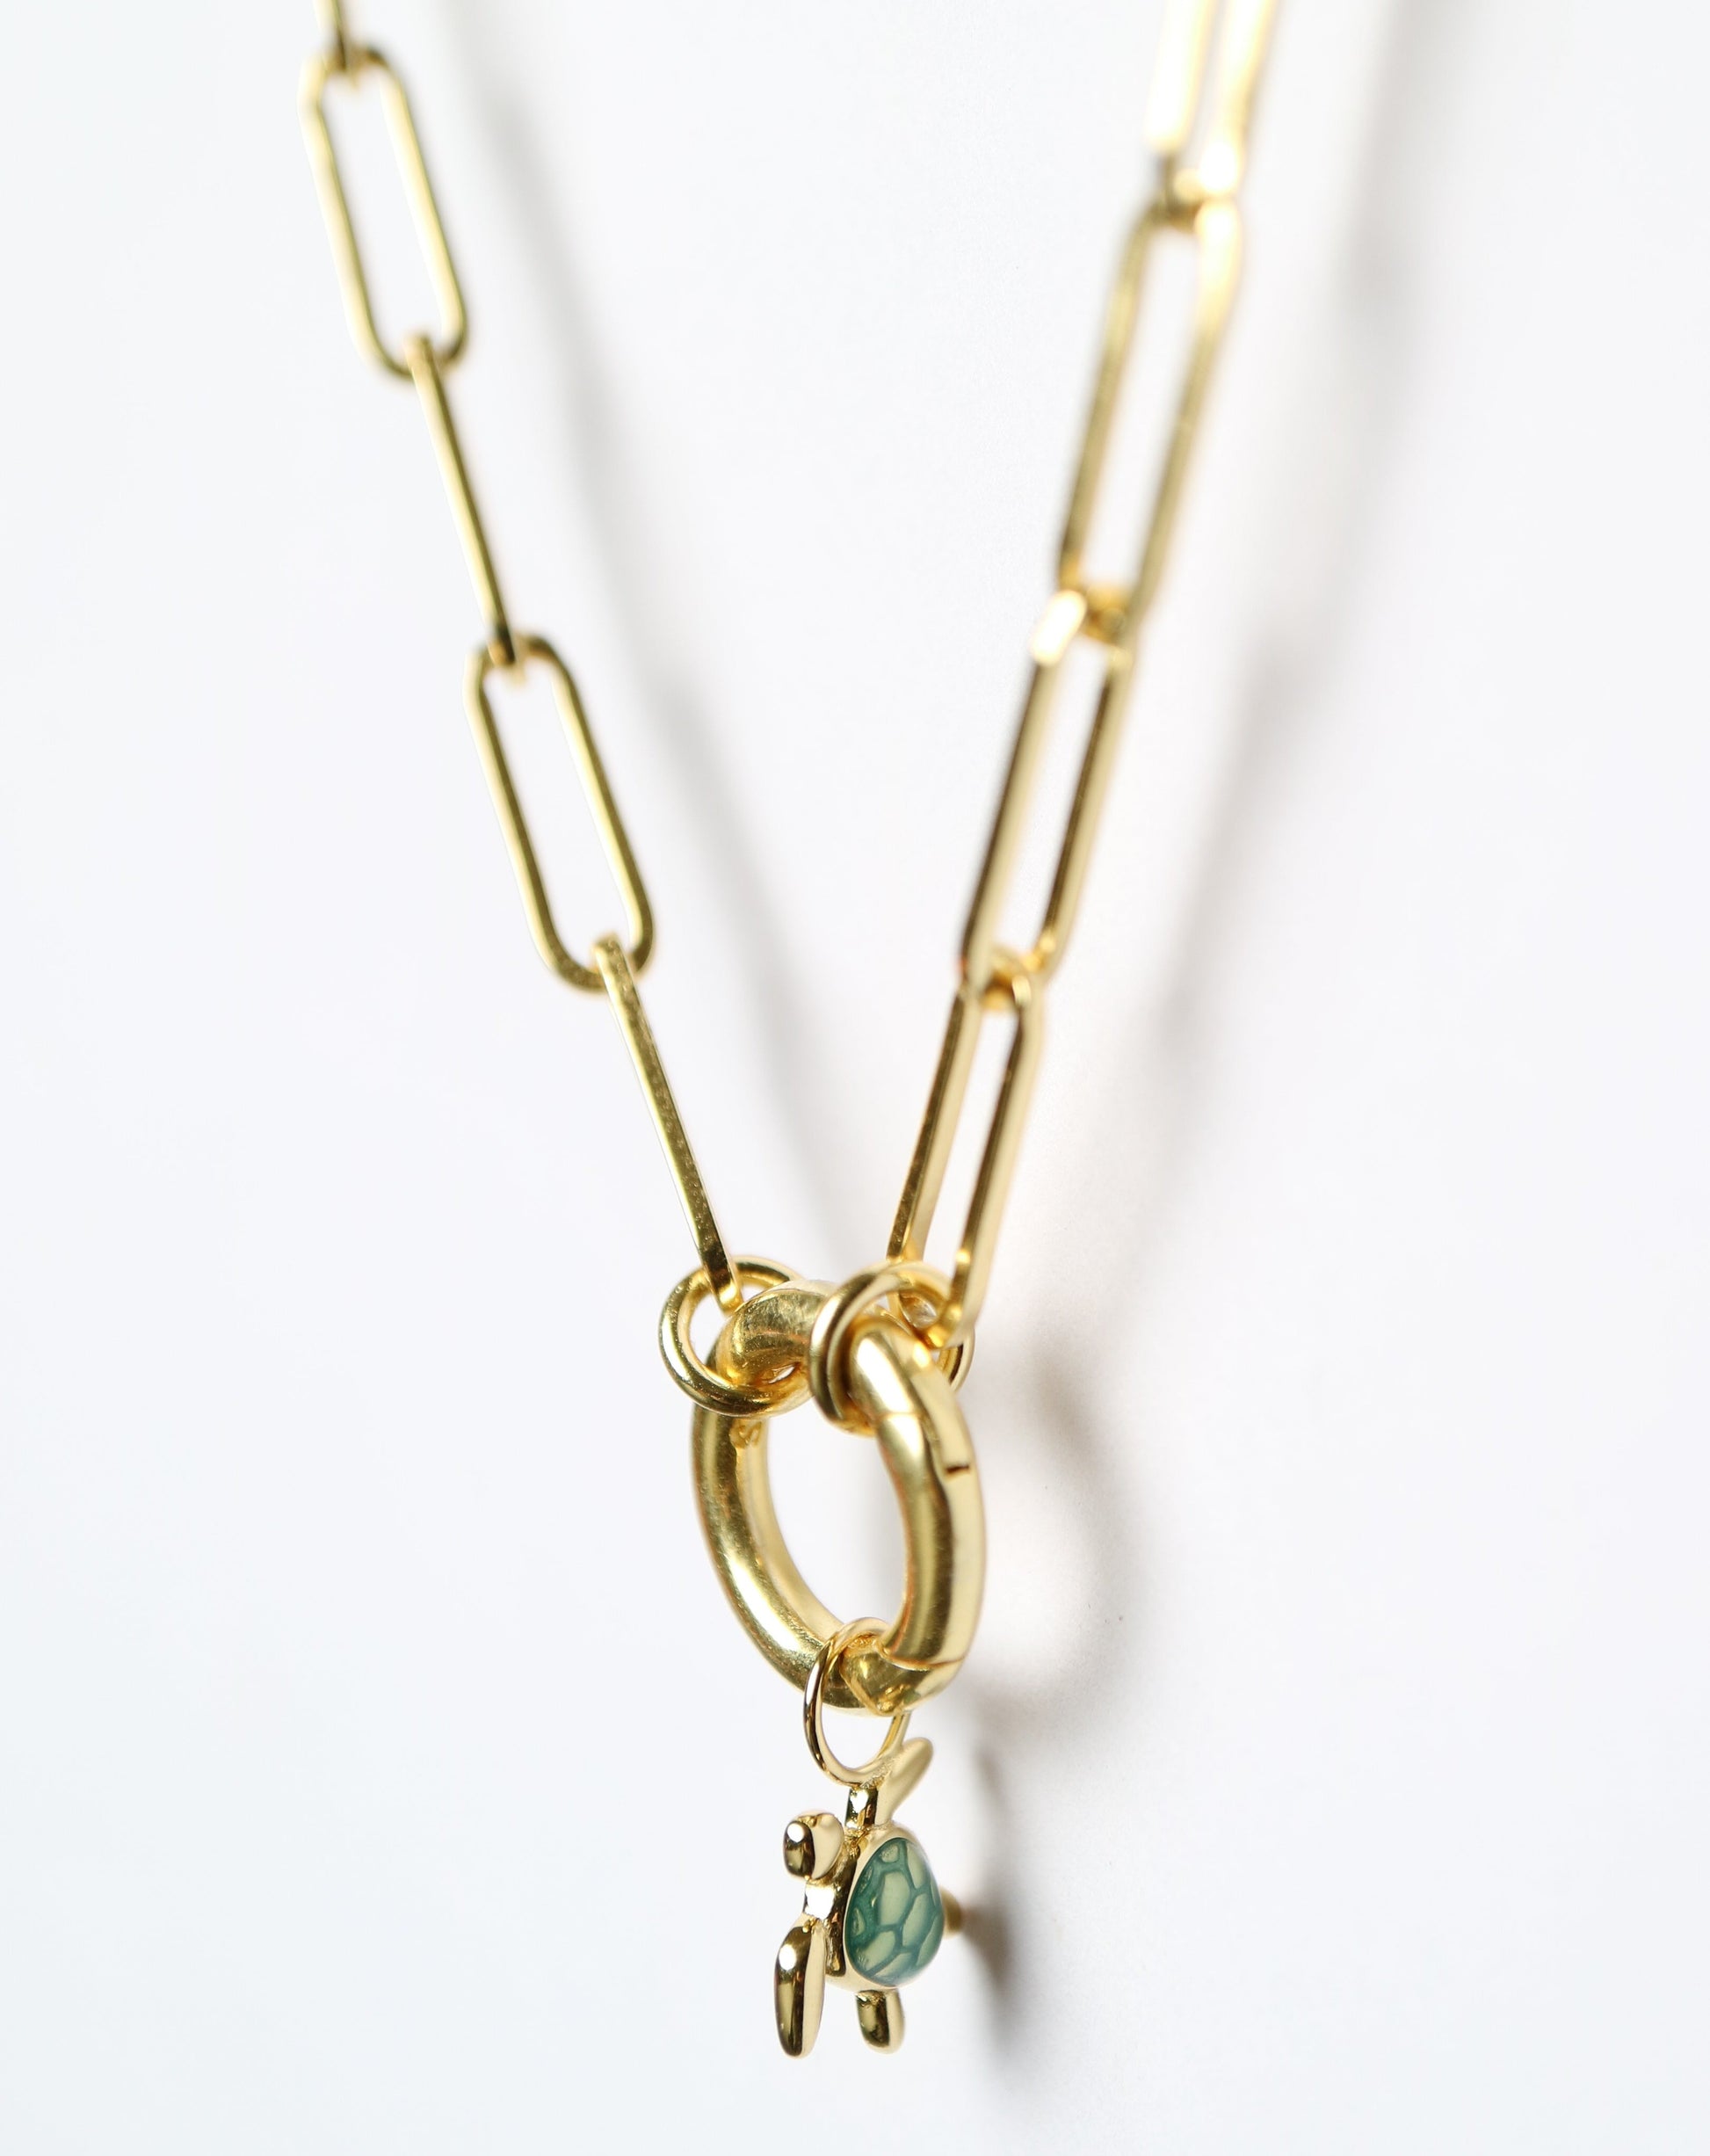 Gold Paperclip Necklace with turtle charm